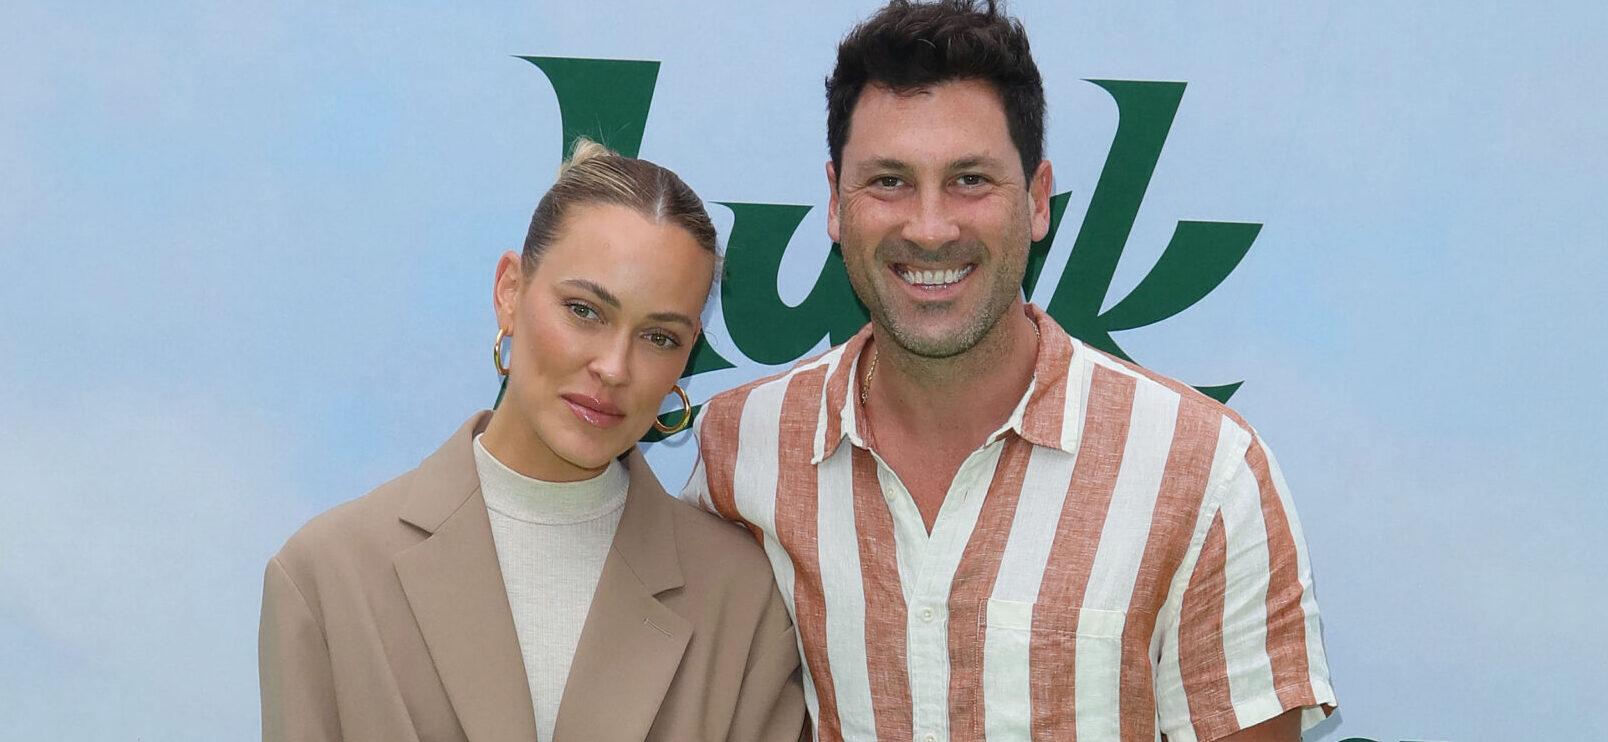 Peta Murgatroyd and Maksim Chmerkovskiy at Red Carpet Event for the global premiere of Apple Original Film LUCK in Los Angeles